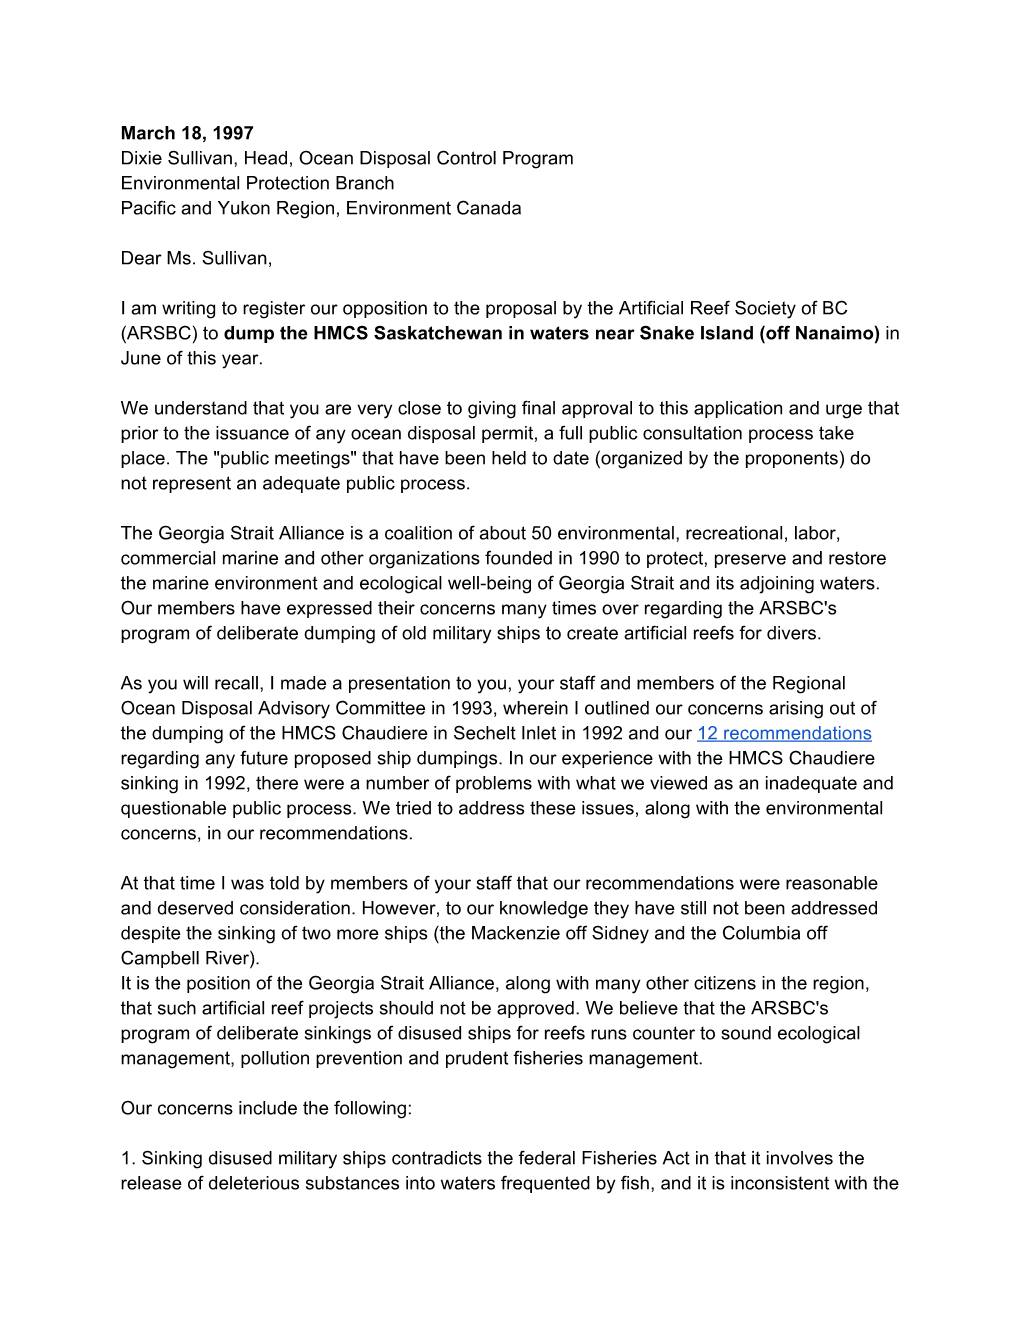 Letter to Environment Canada